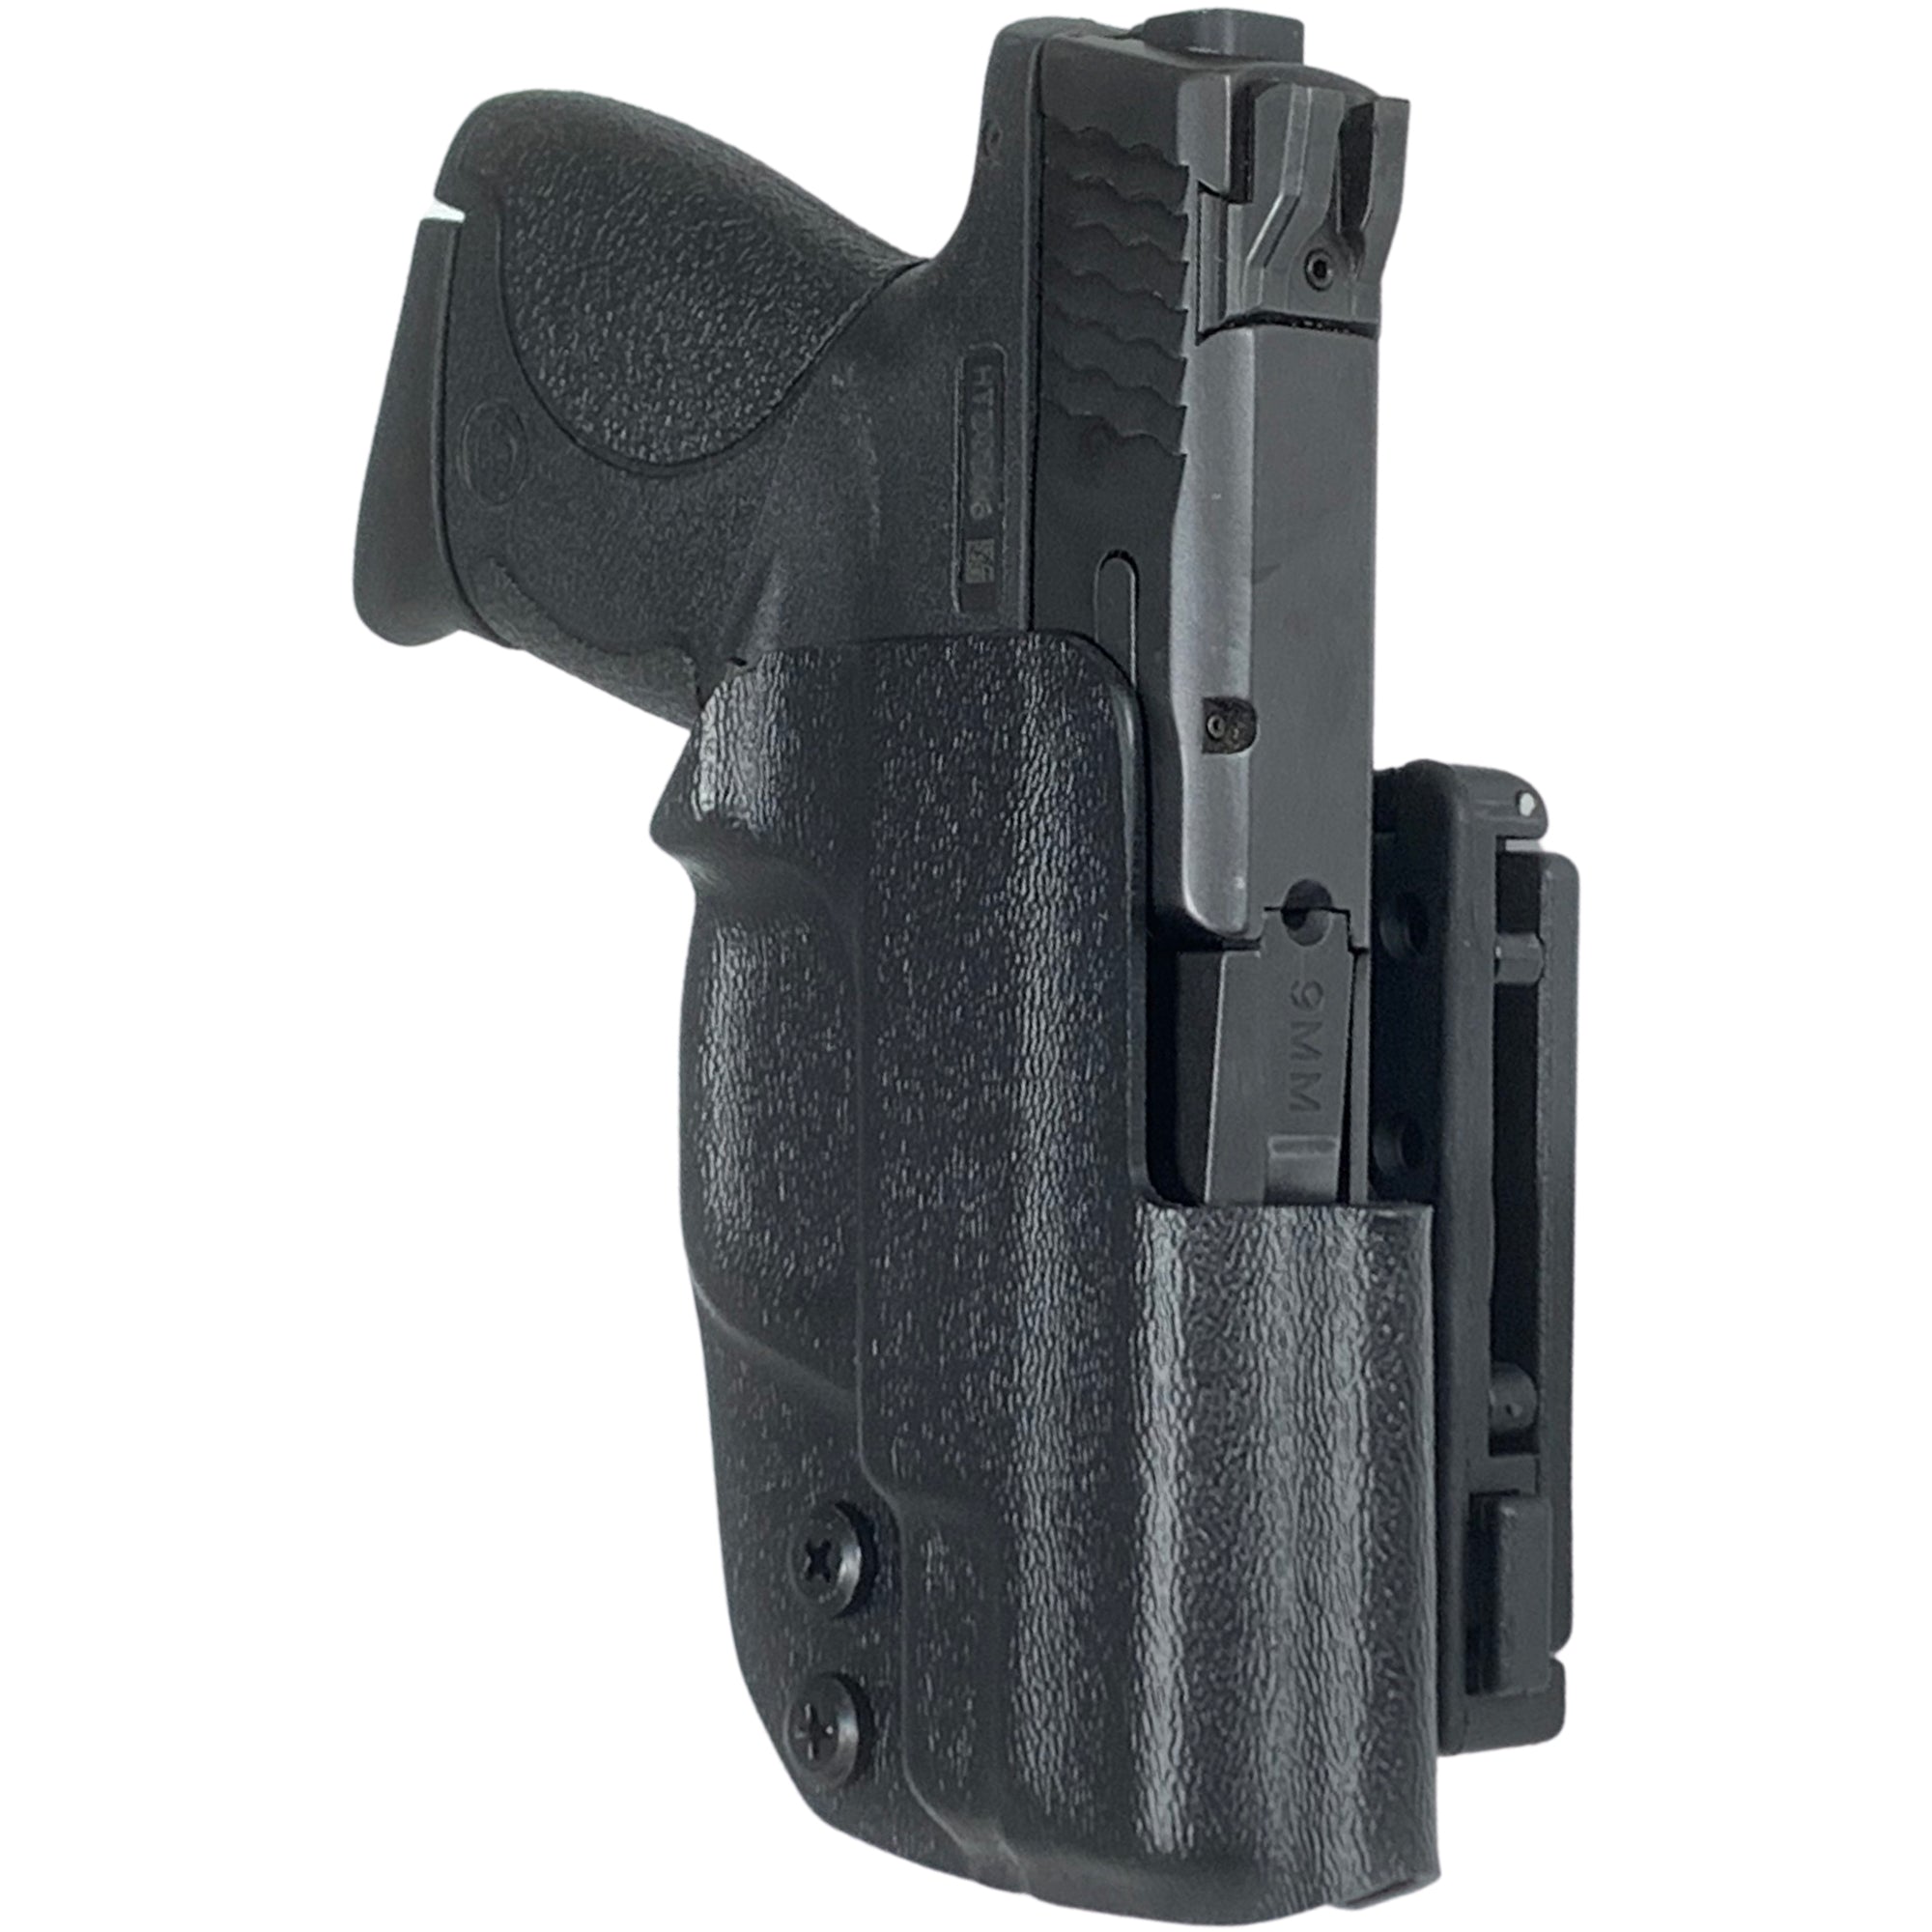 Smith & Wesson M&P Shield Pro IDPA Holster